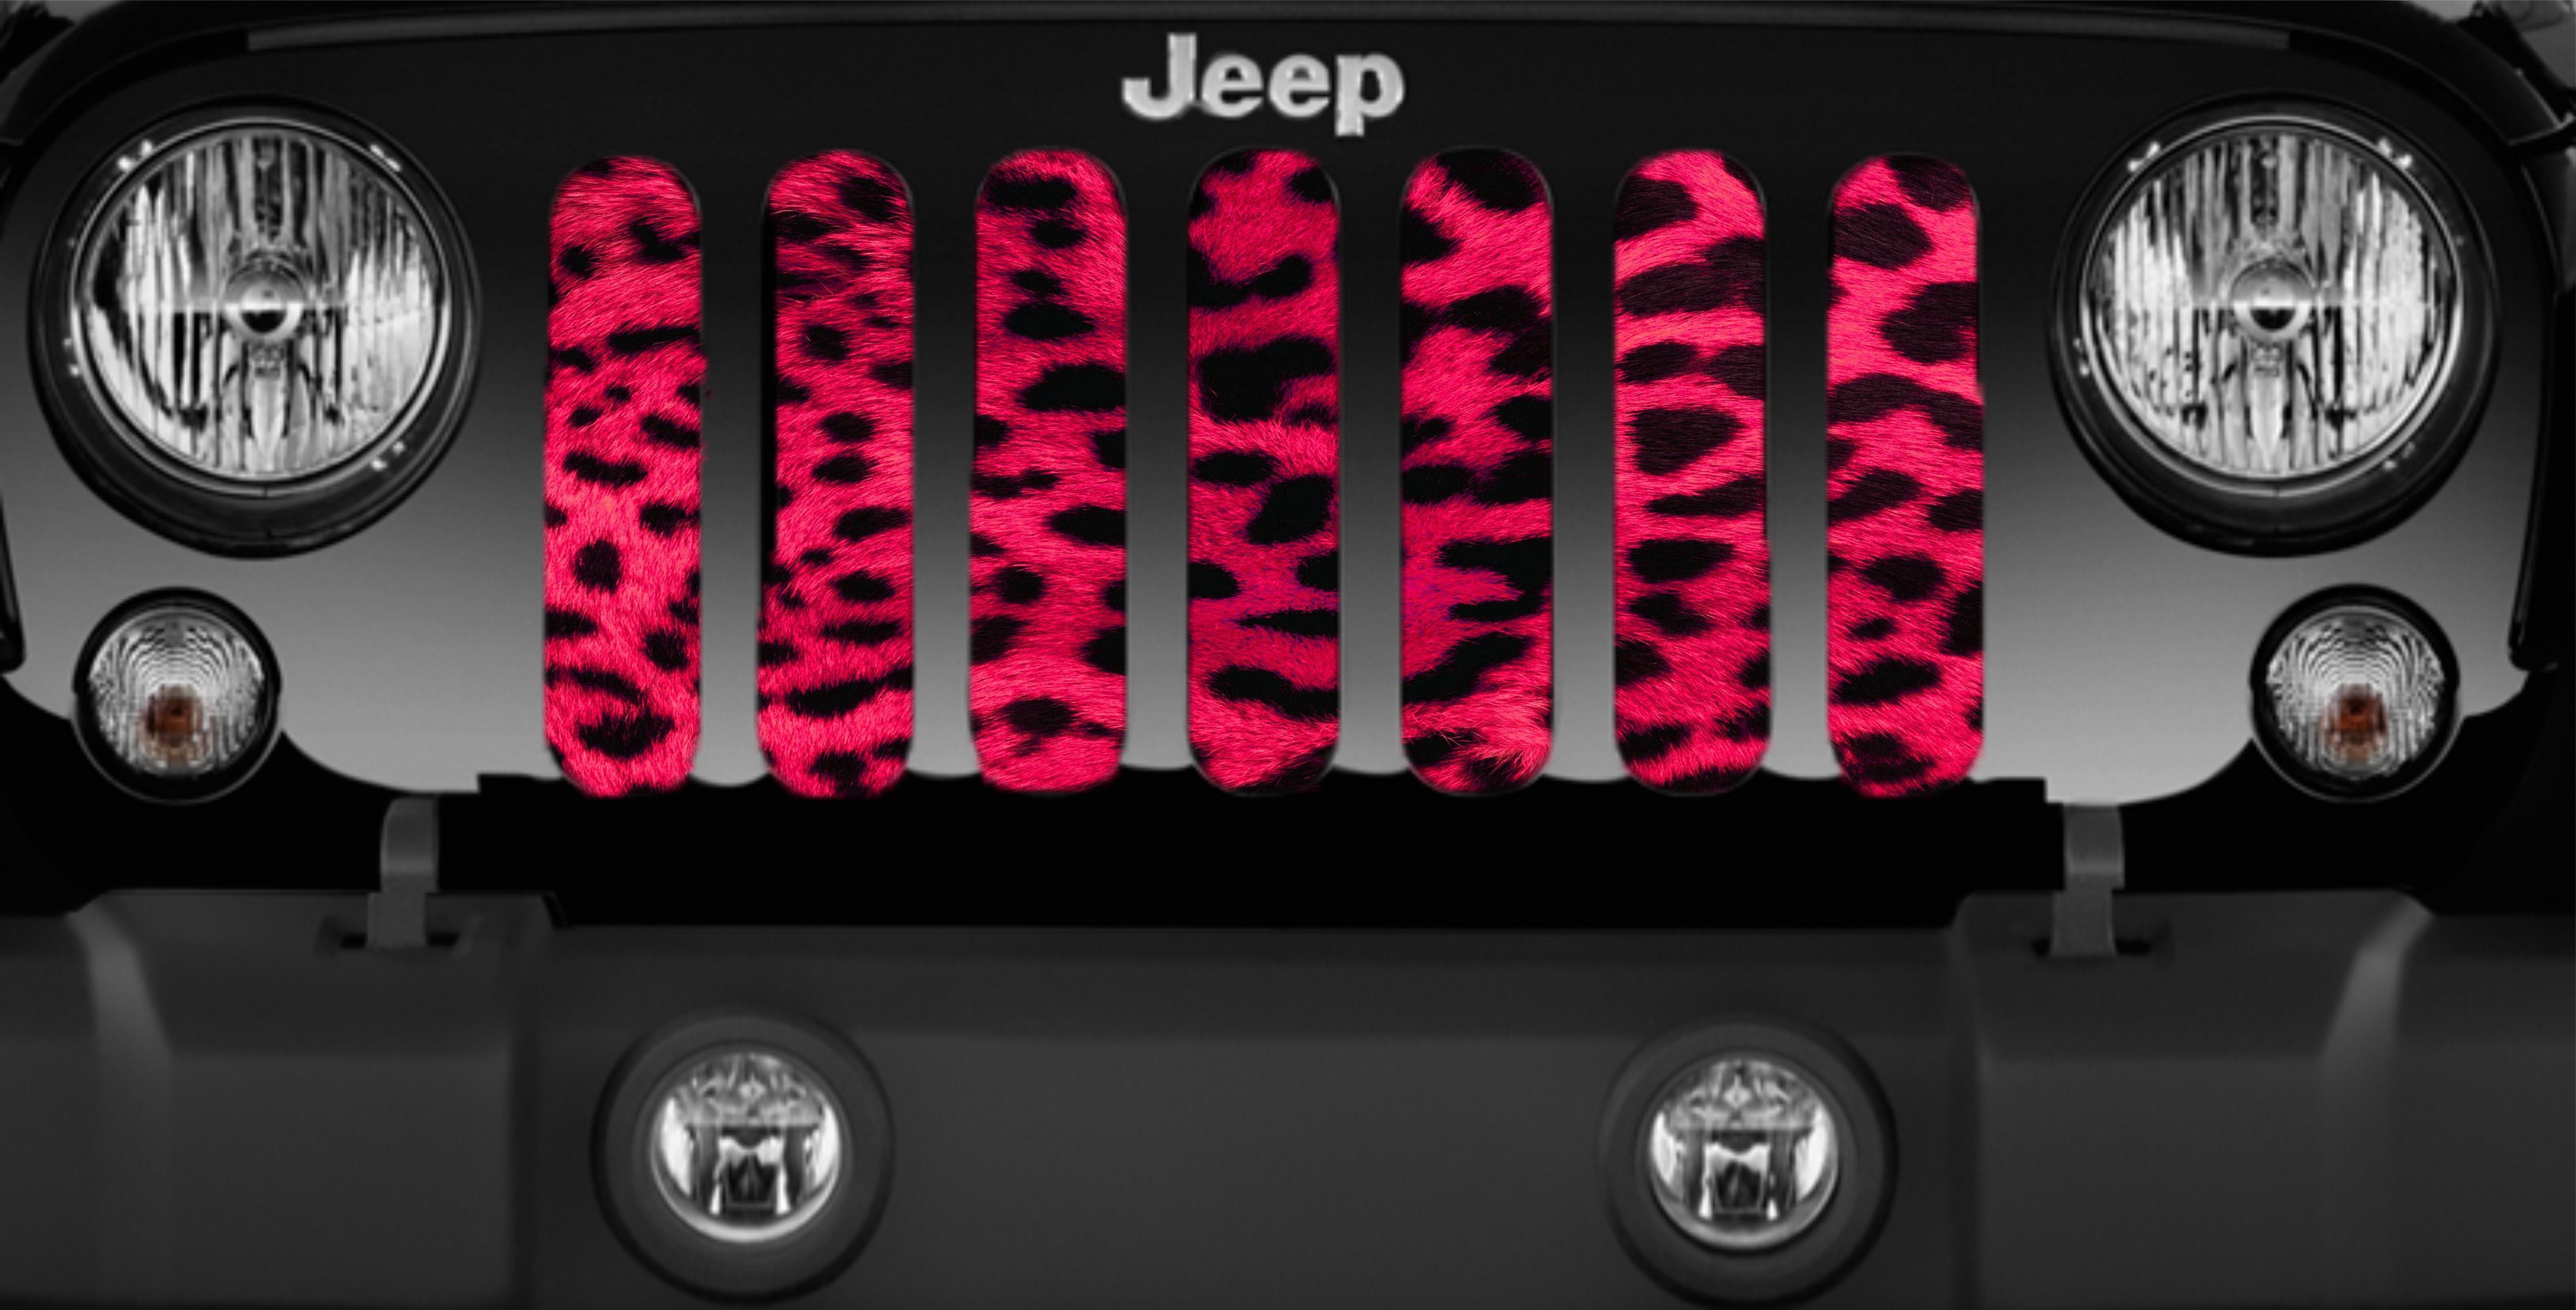 Close Up of a Pink Leopard Cheetah Animal Print Mesh Grille Insert for Jeep